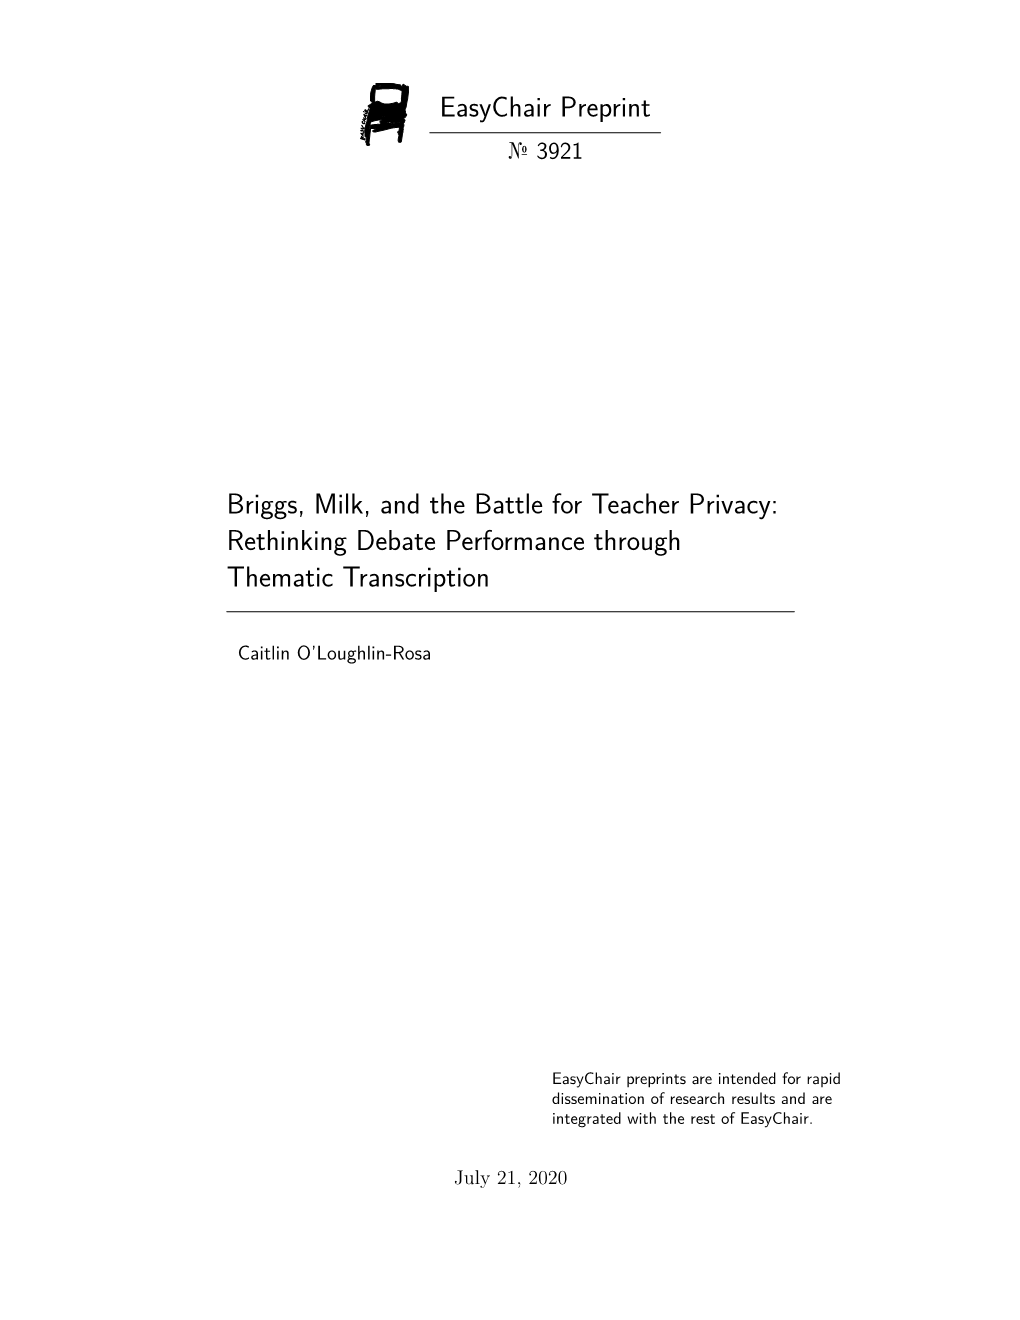 Briggs, Milk, and the Battle for Teacher Privacy: Rethinking Debate Performance Through Thematic Transcription